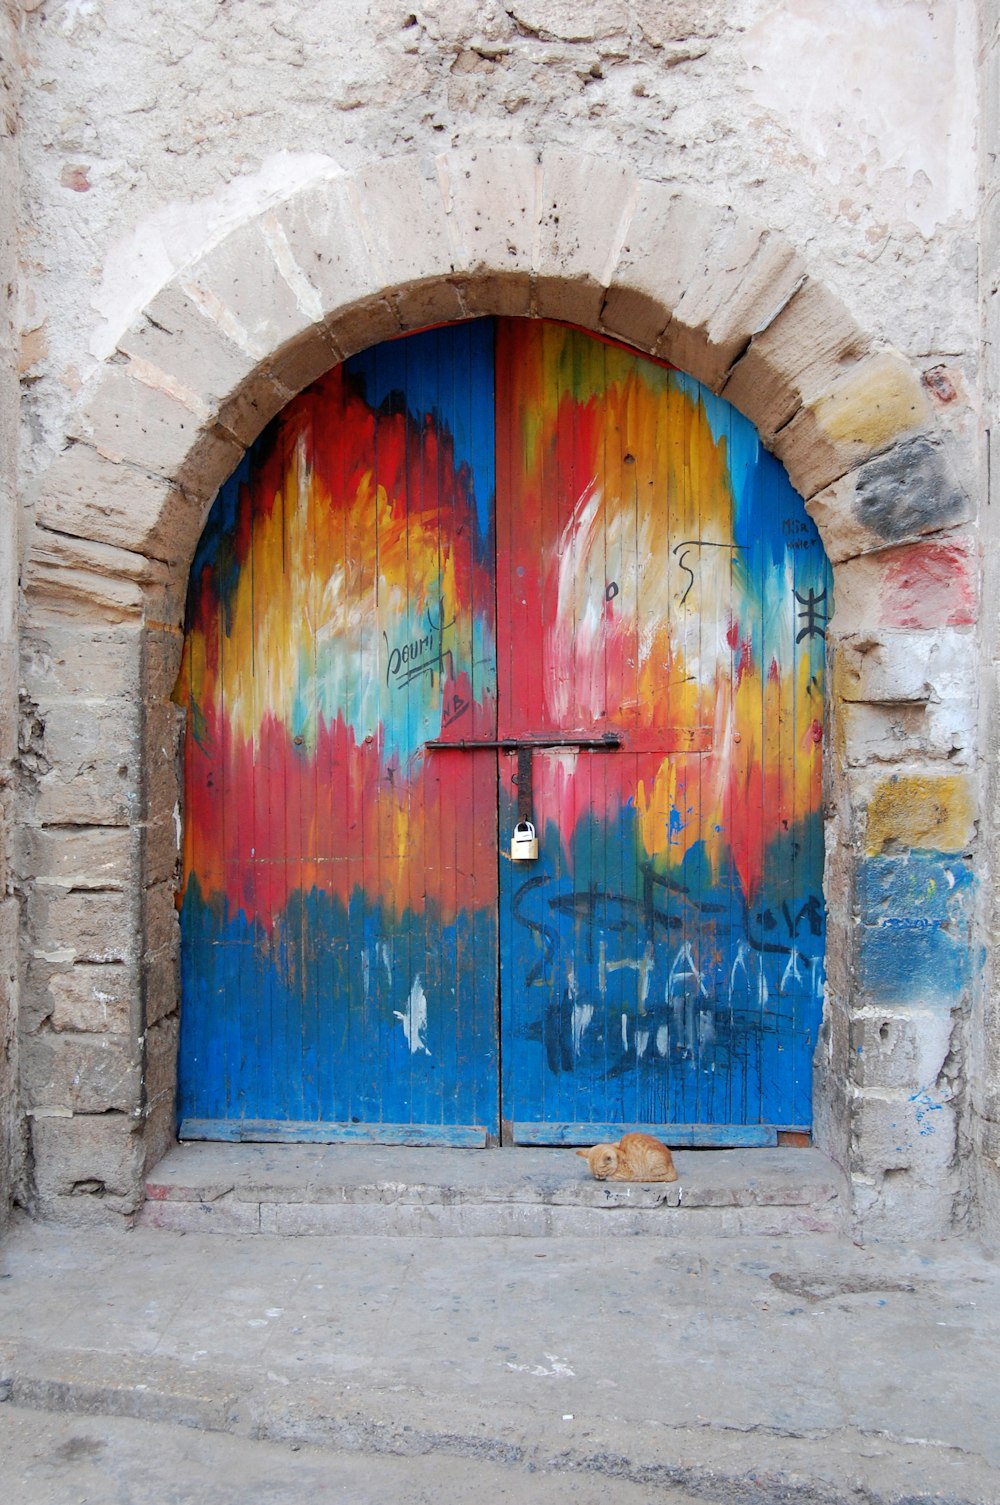 A colorfully painted rounded door.